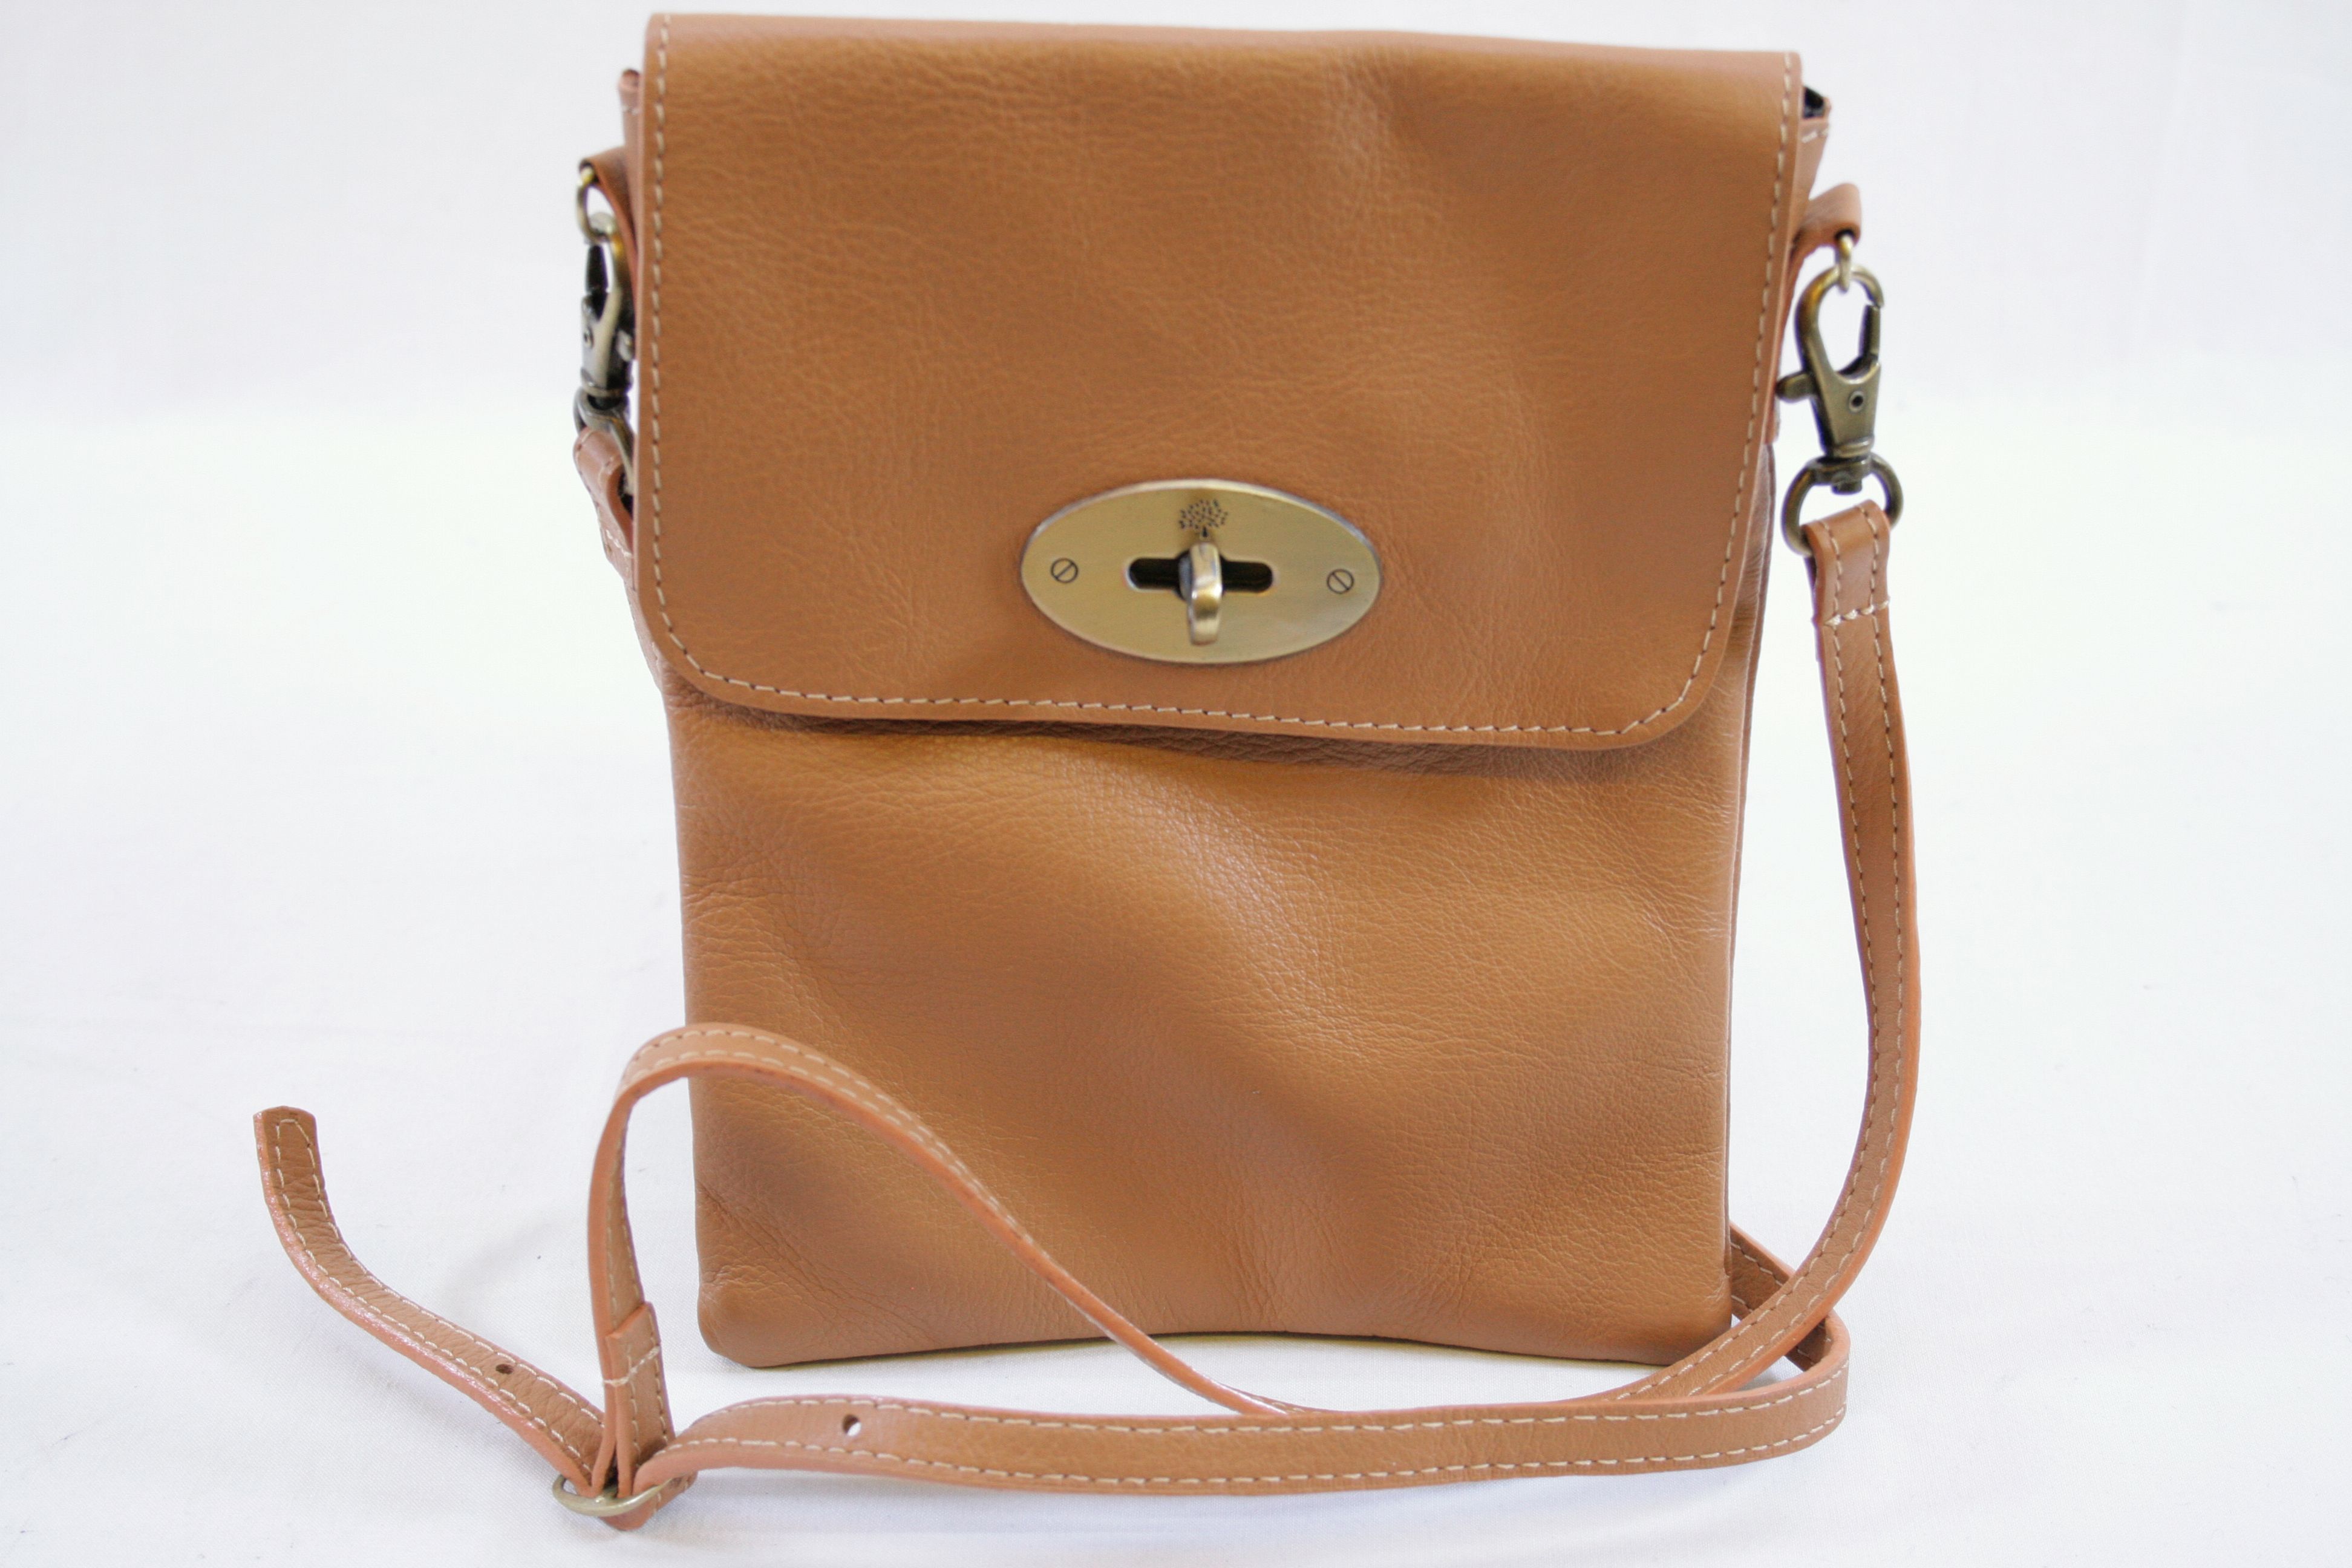 SOLD - Vintage Mulberry Oak / Tan Leather Small Cross Body Shoulder Bag  Pouch Made in England